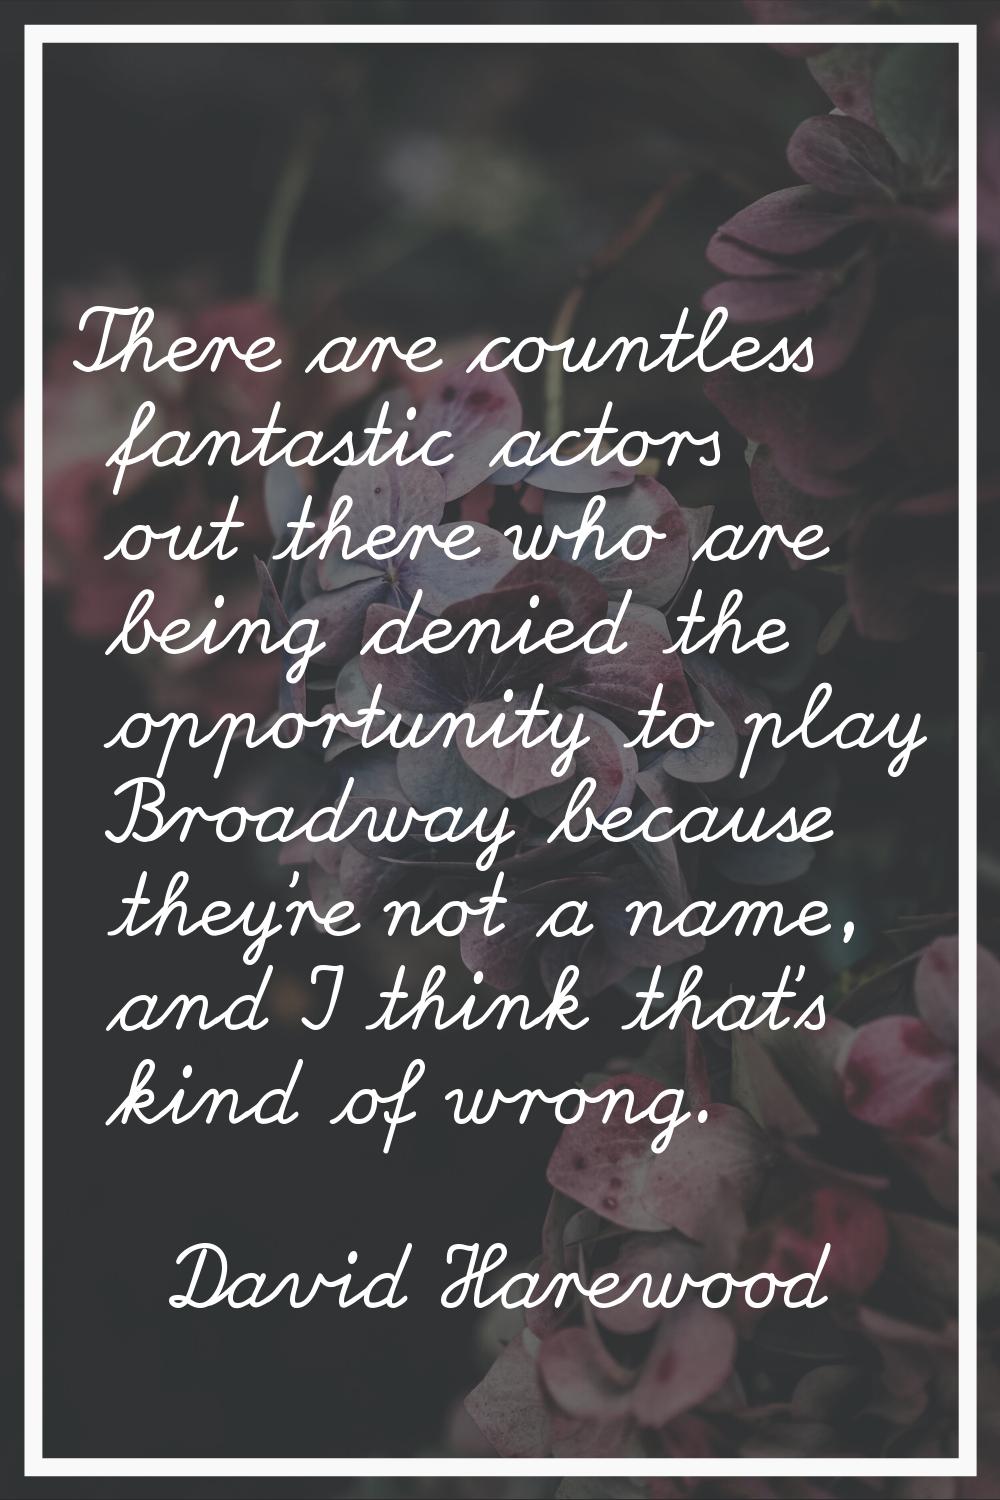 There are countless fantastic actors out there who are being denied the opportunity to play Broadwa